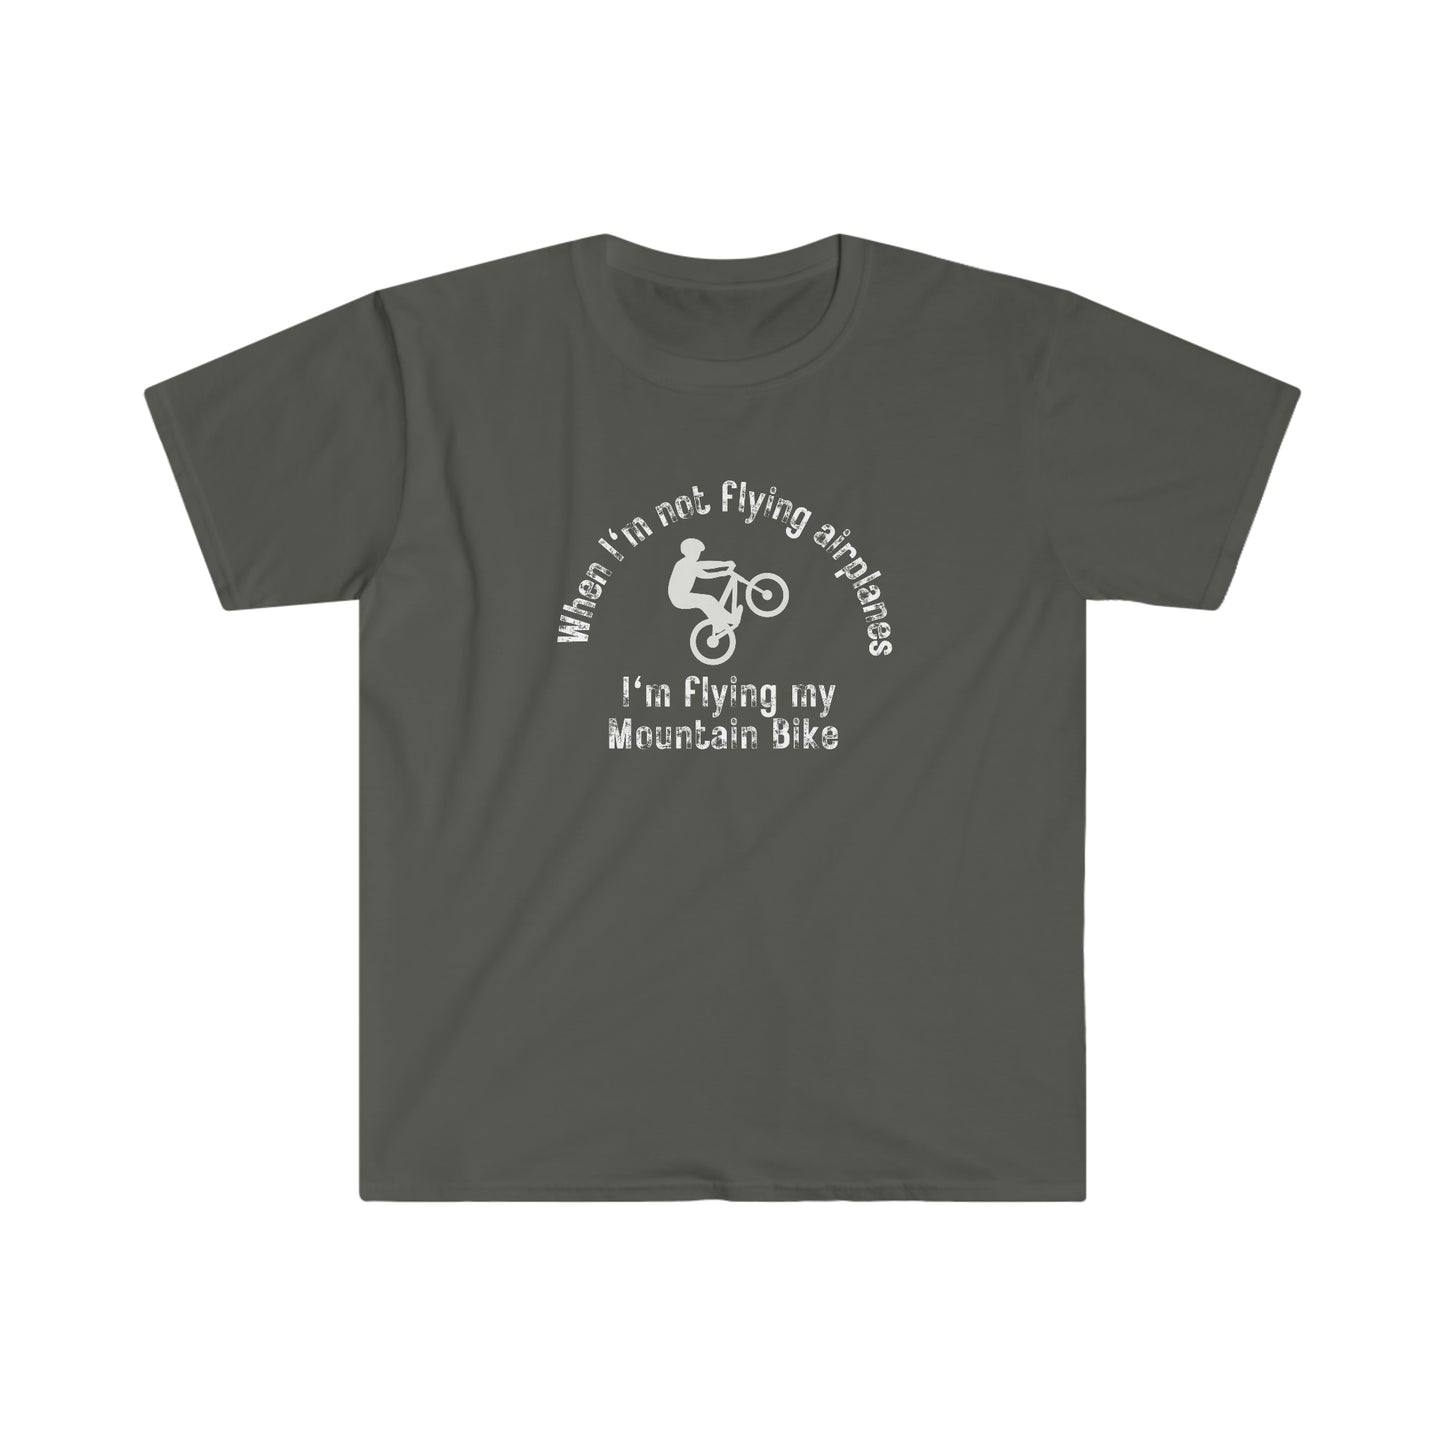 When I'm Not Flying Airplanes, I'm Flying My Mountain Bike T-Shirt